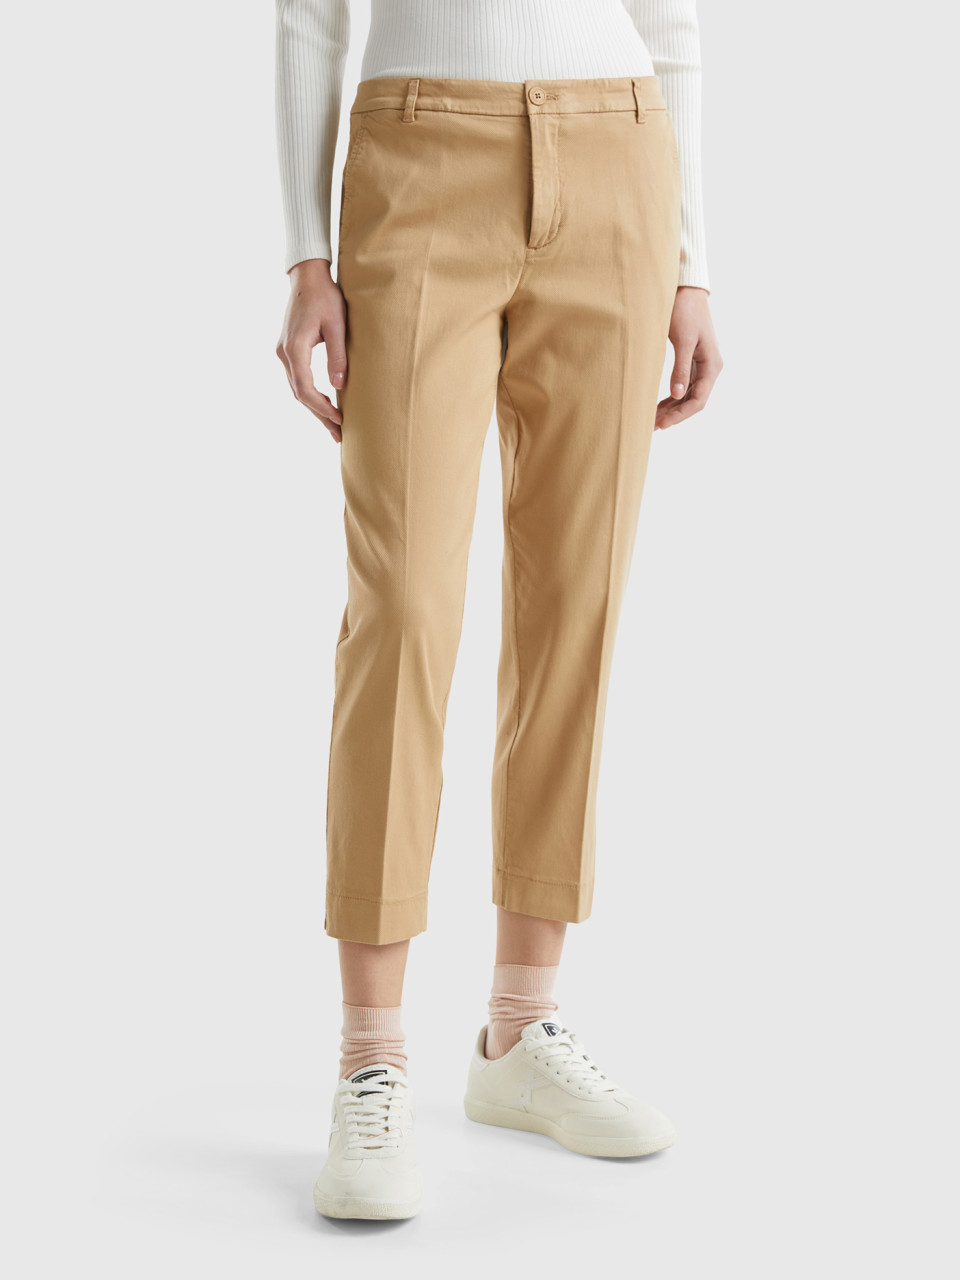 Benetton, Cropped Chinos In Stretch Cotton, Camel, Women